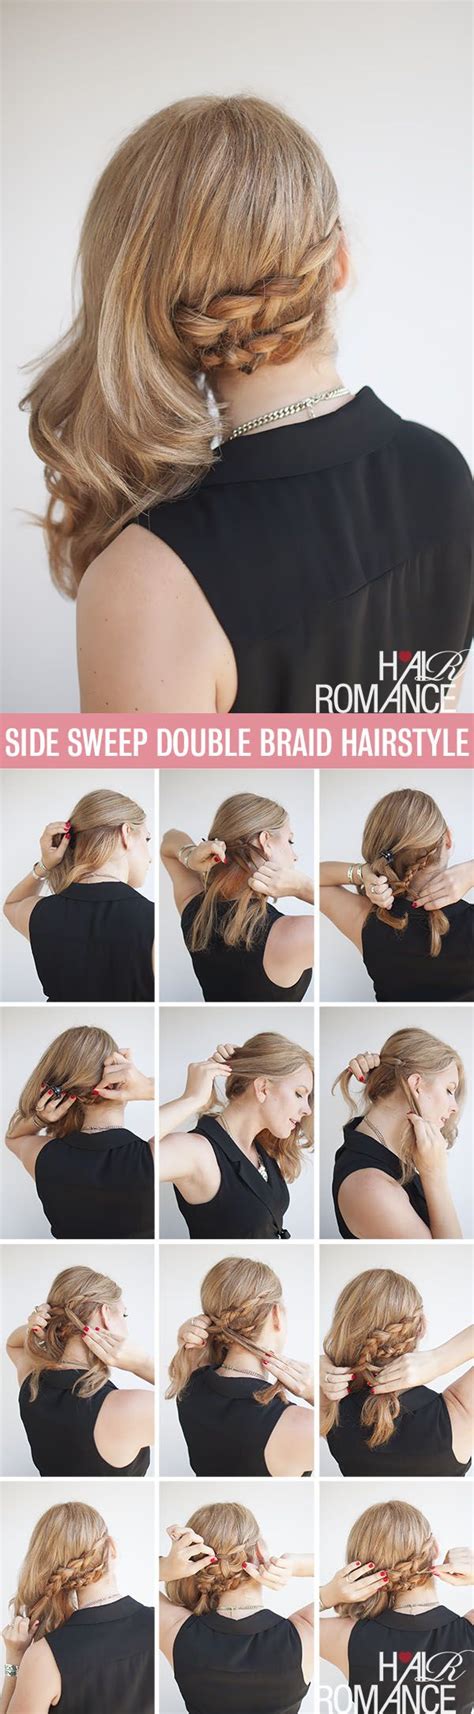 Hair Romance Hairstyle Tutorial Double Braid Side Sweep Hairstyle